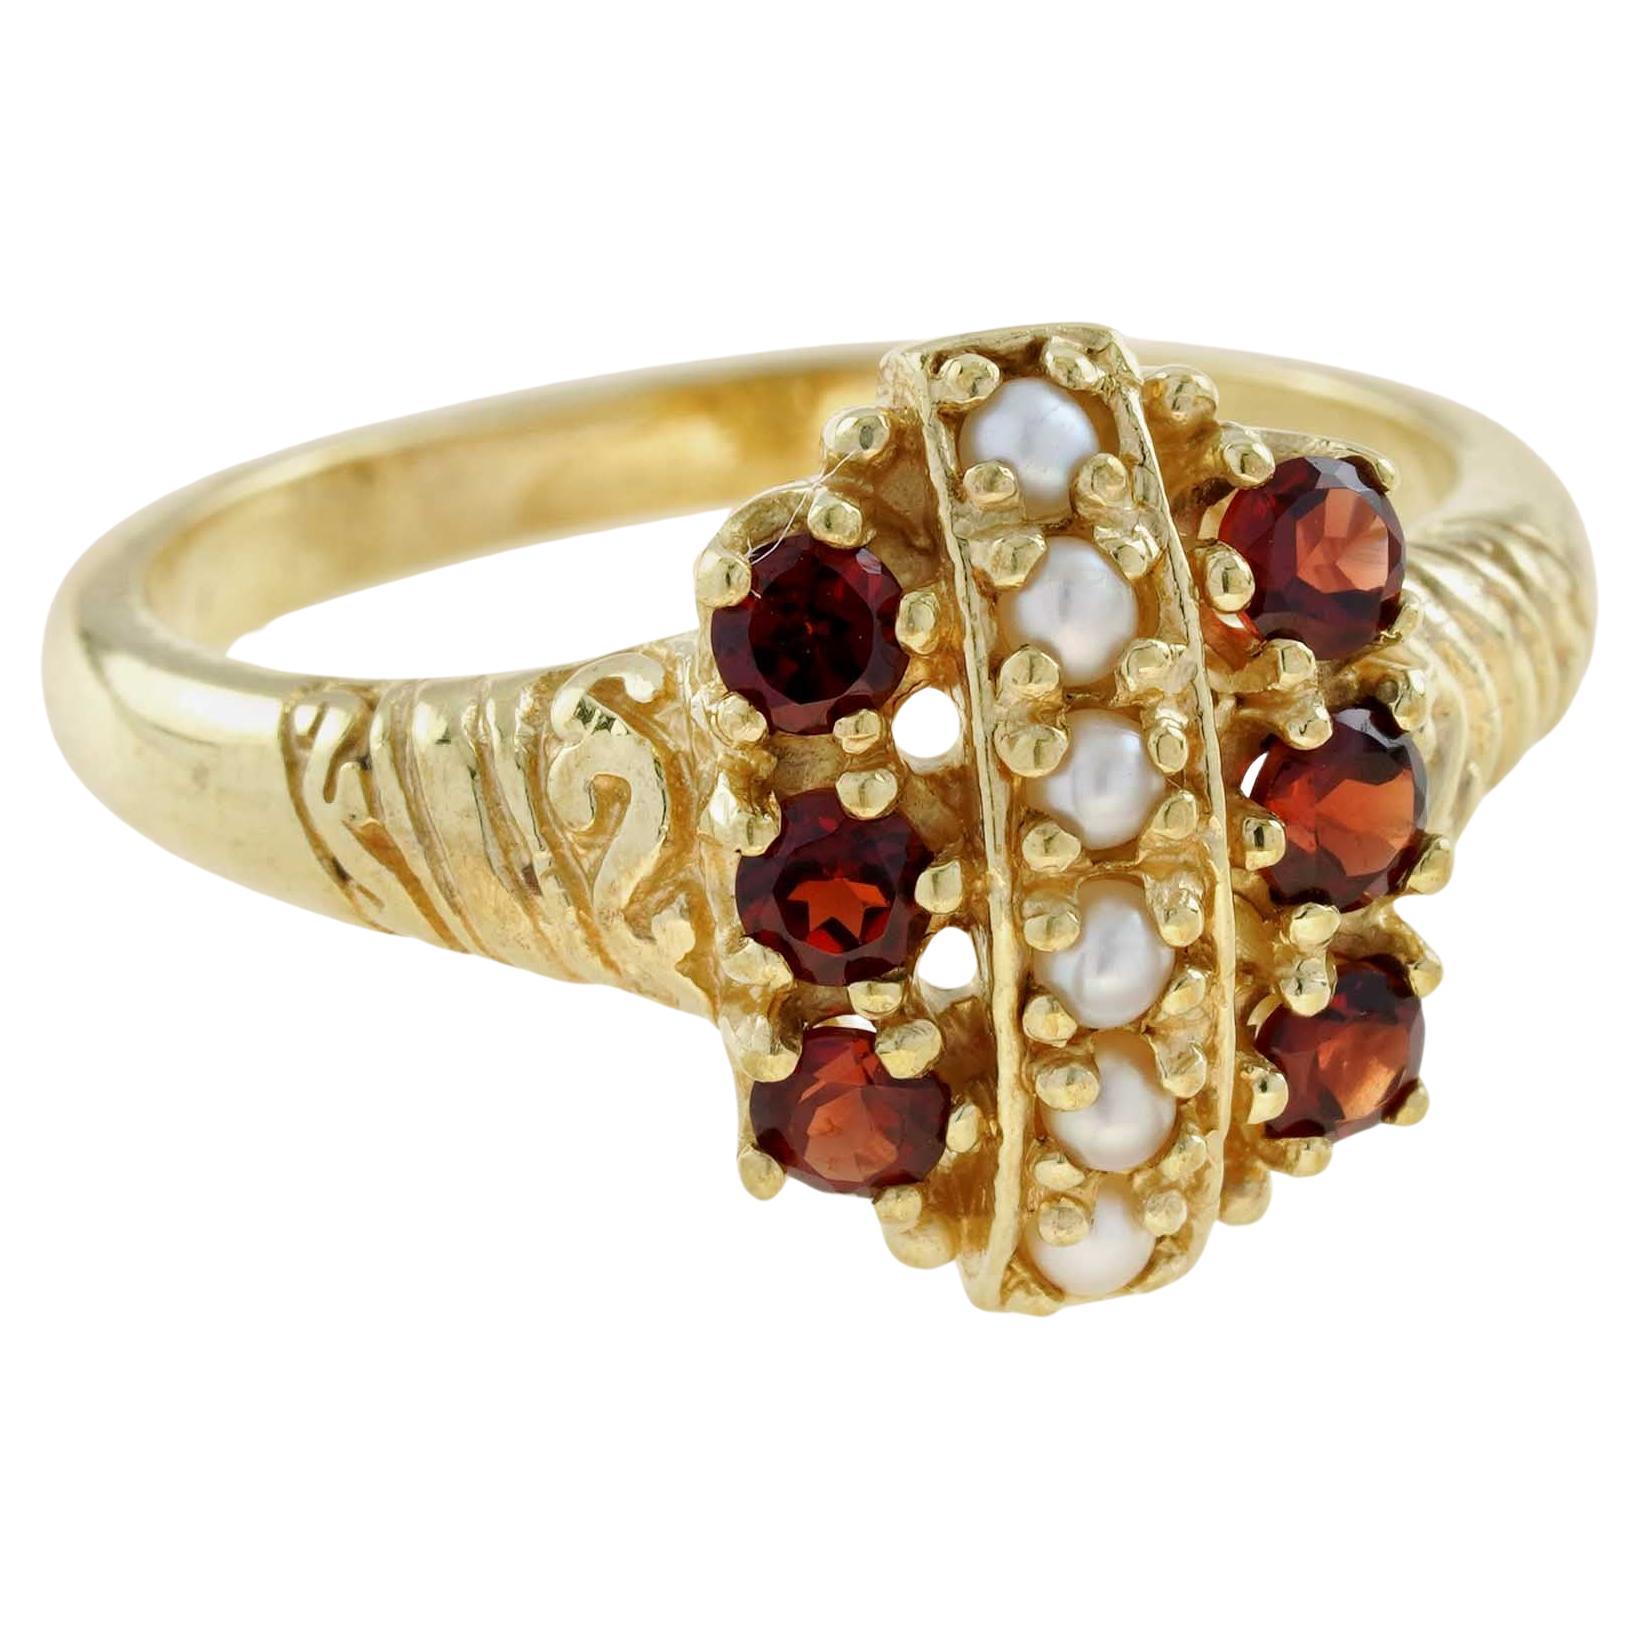 For Sale:  Natural Garnet and Pearl Vintage Style Cluster Ring in Solid 9K Gold